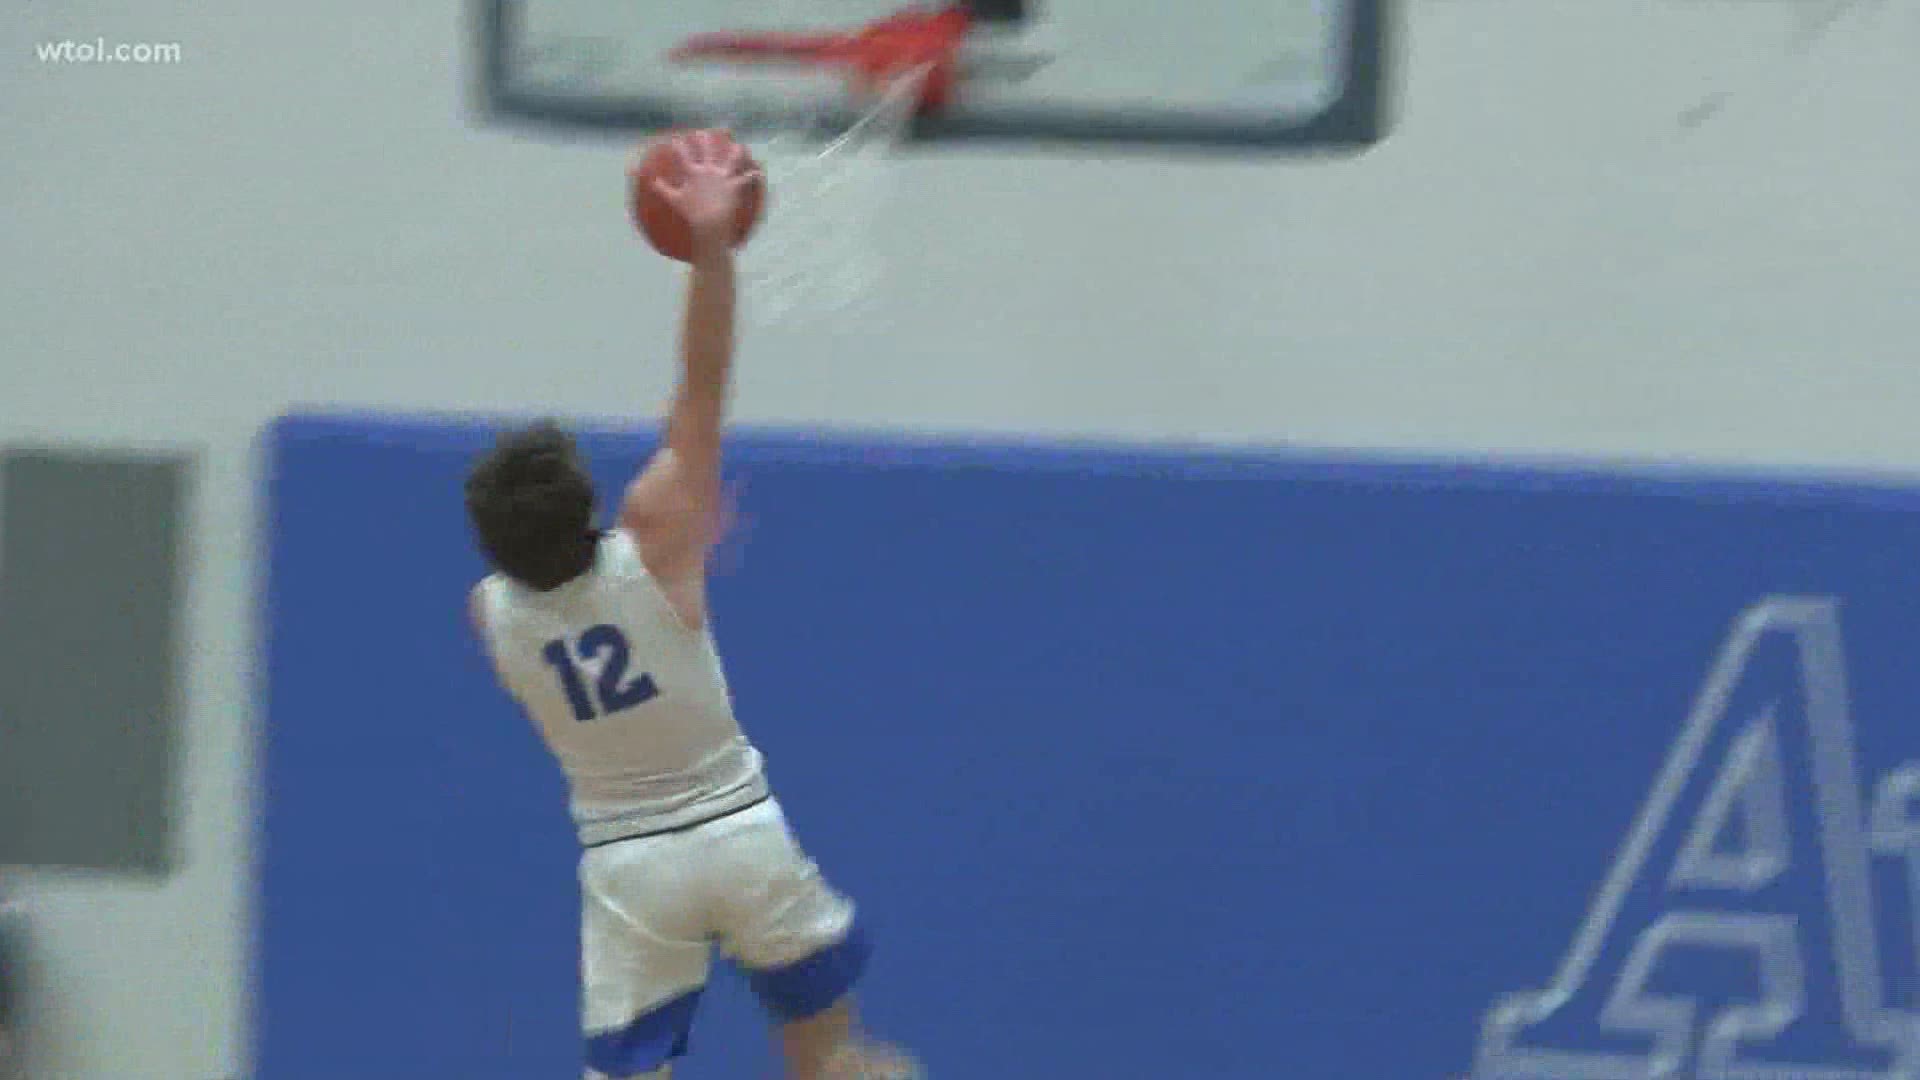 It's basketball playoff season across the area and we've got highlights from high school boys and girls matchups!